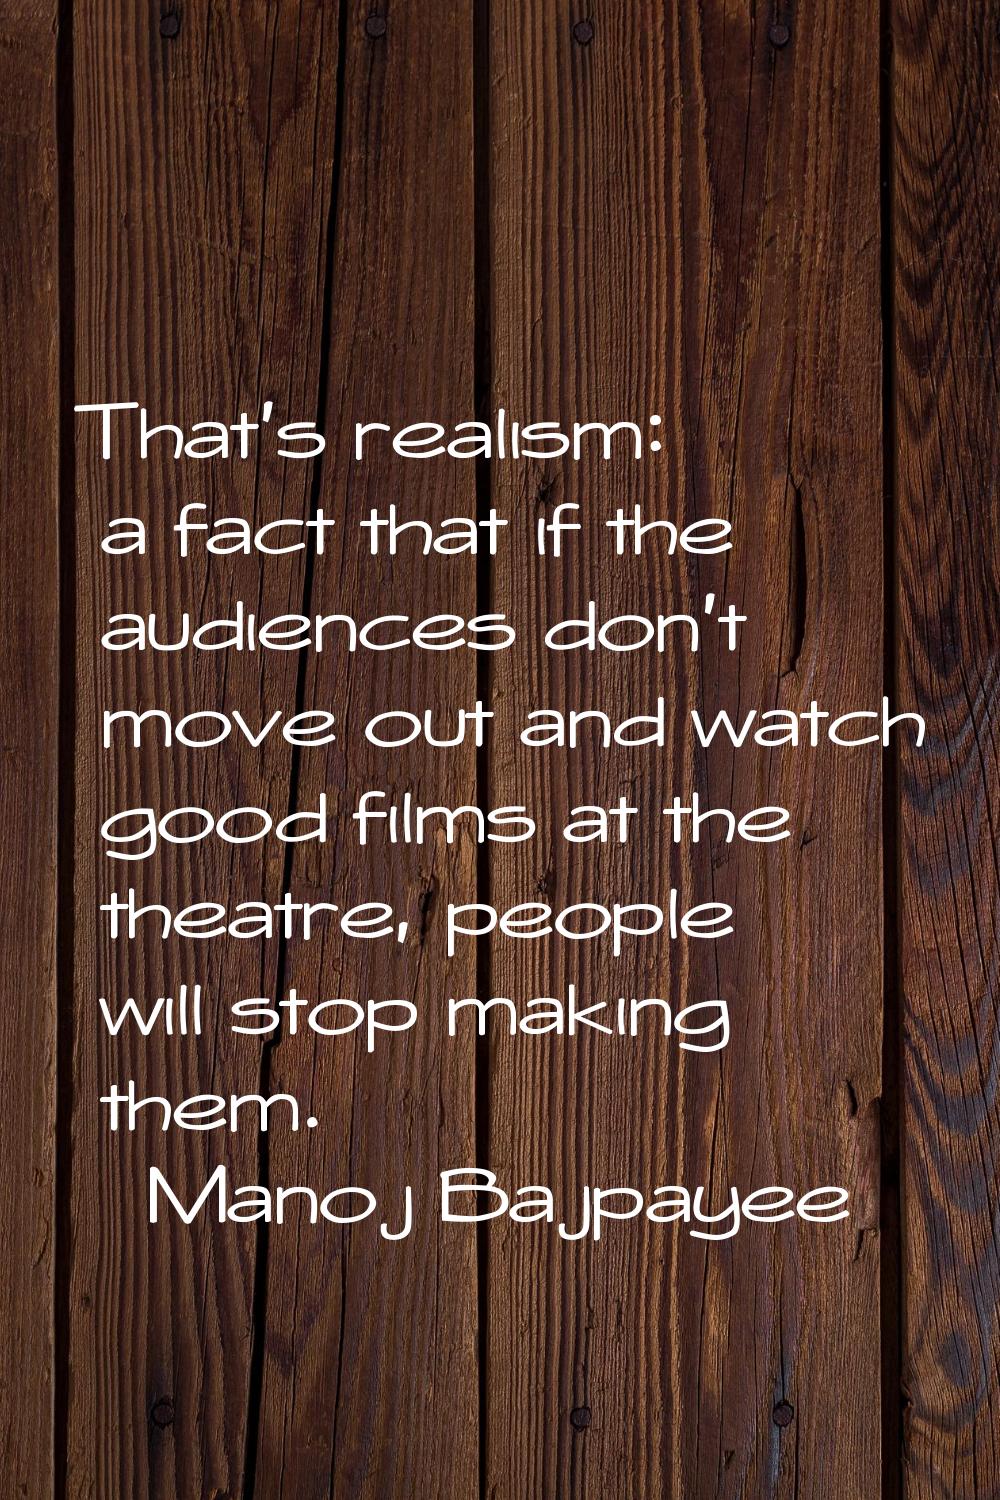 That's realism: a fact that if the audiences don't move out and watch good films at the theatre, pe